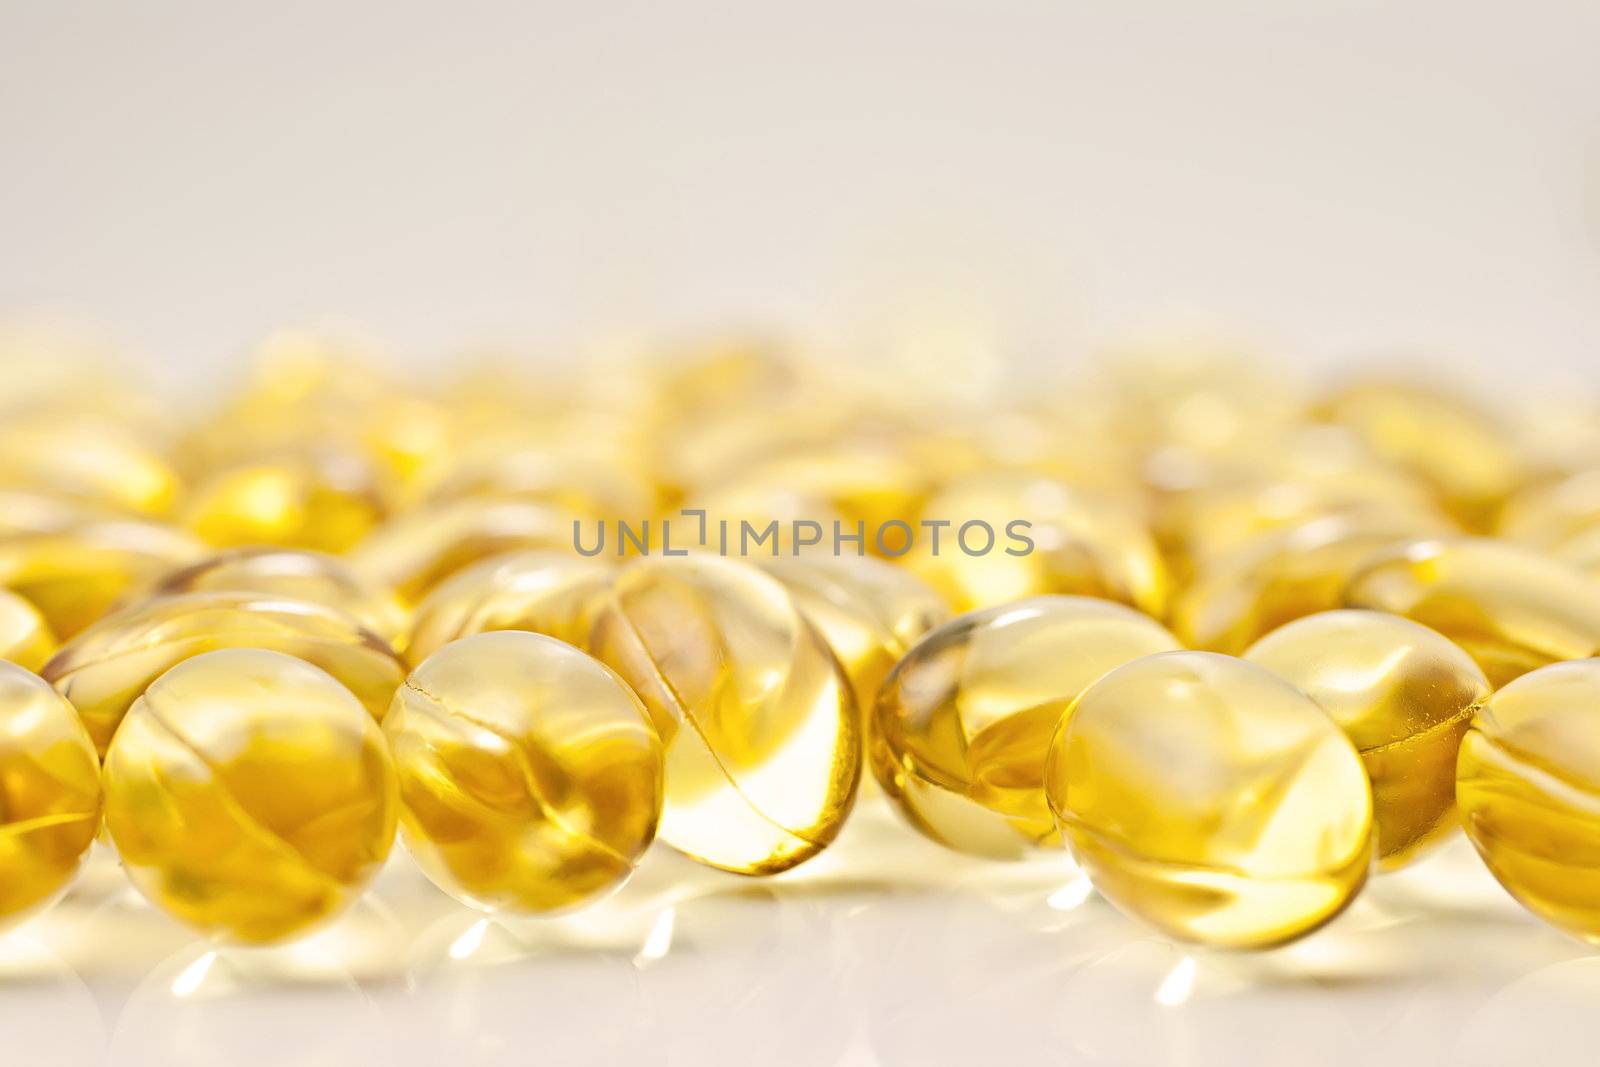 Nutritional supplement pills in warm colors and shallow depth of field. The yellow ones are vitamin E and cod liver oil.